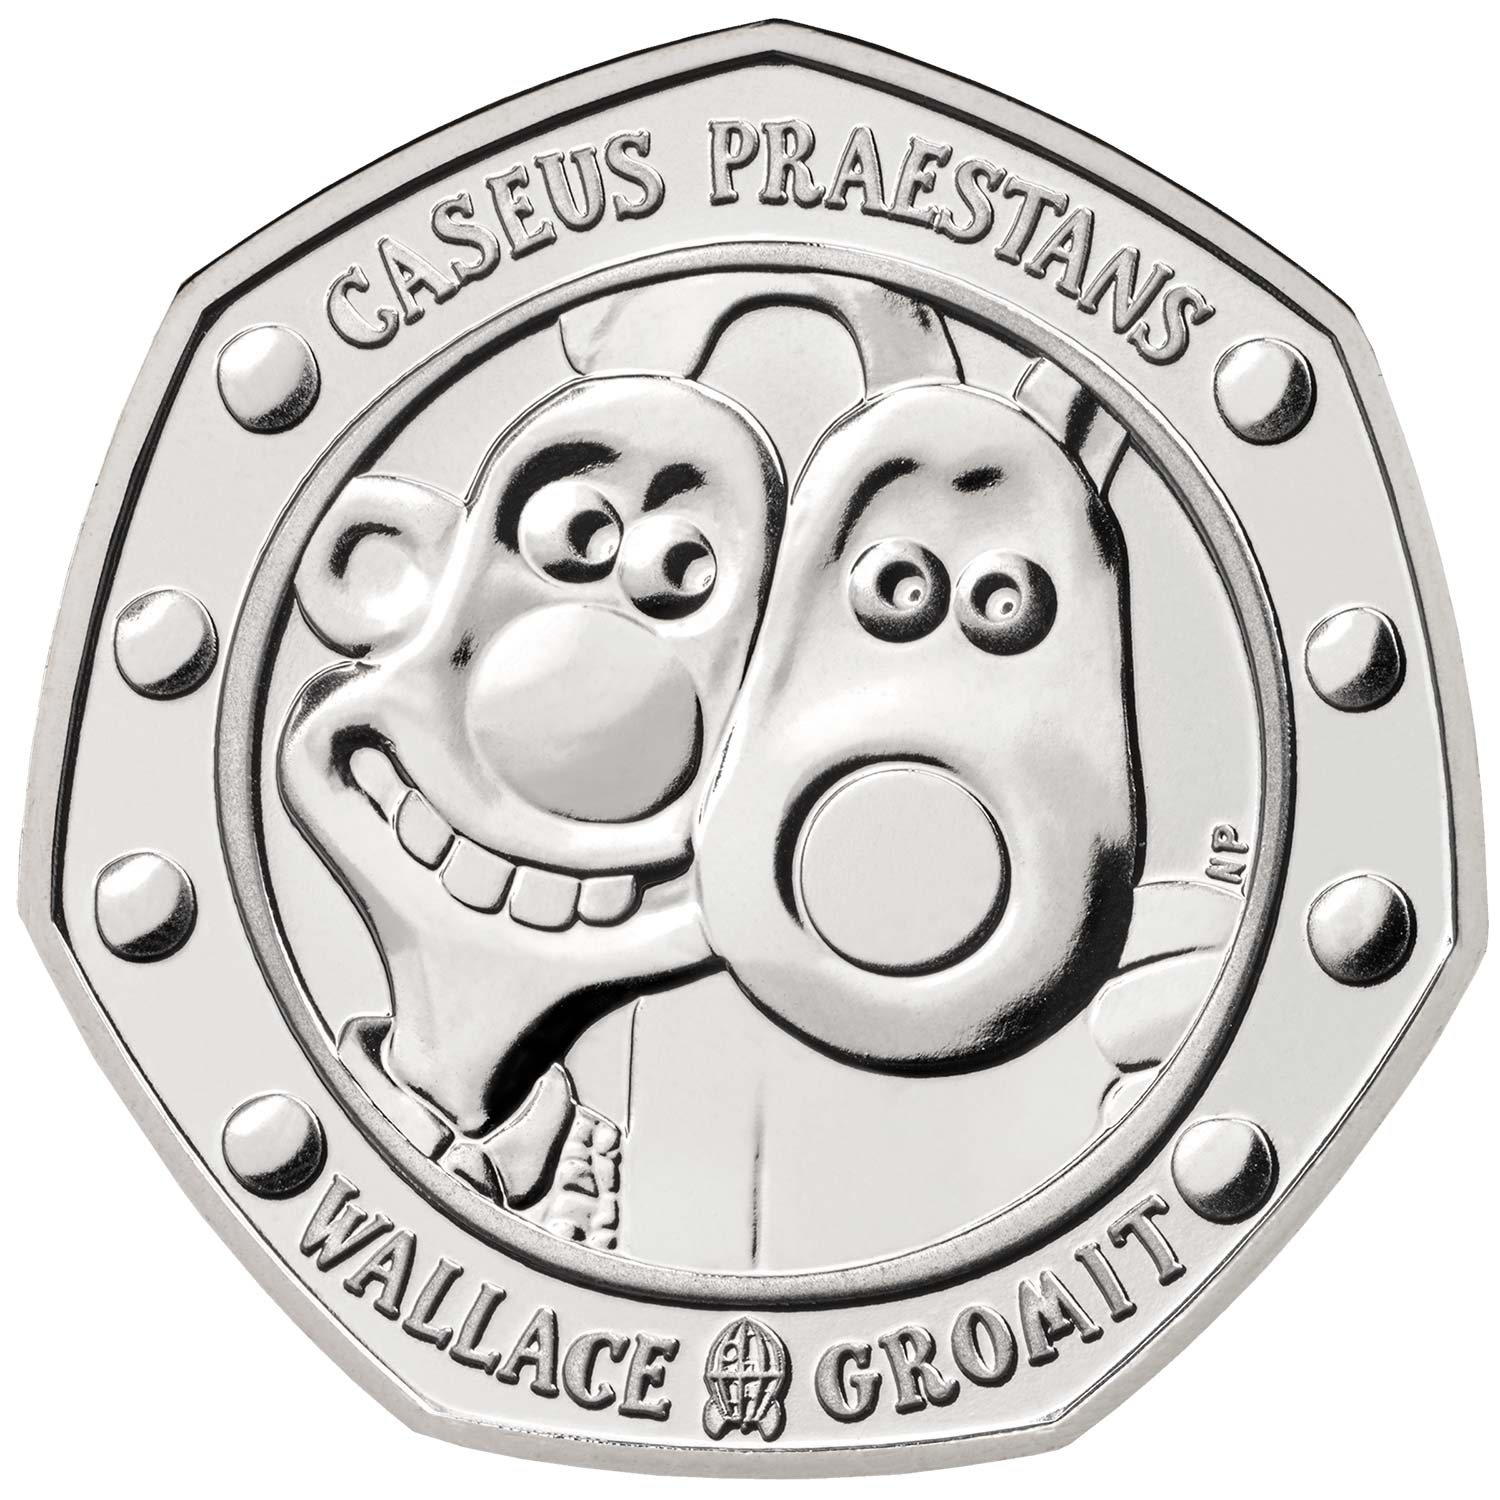 Wallace and Gromit 2019 UK 50p BU Coin The Royal Mint